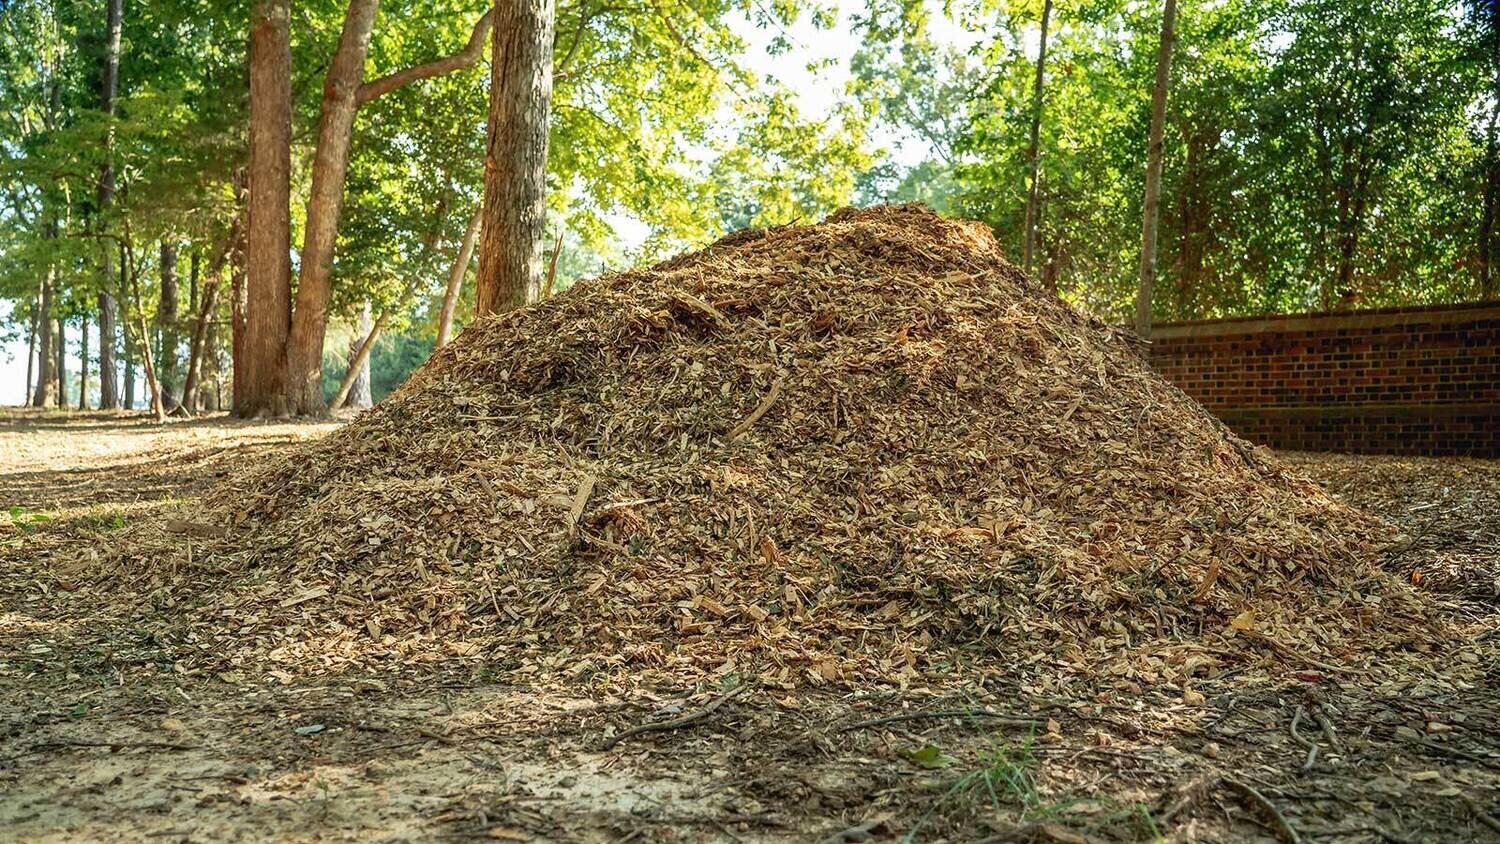 Wood chips - free, no need to order, inquire at pickup, bring your own bags/containers